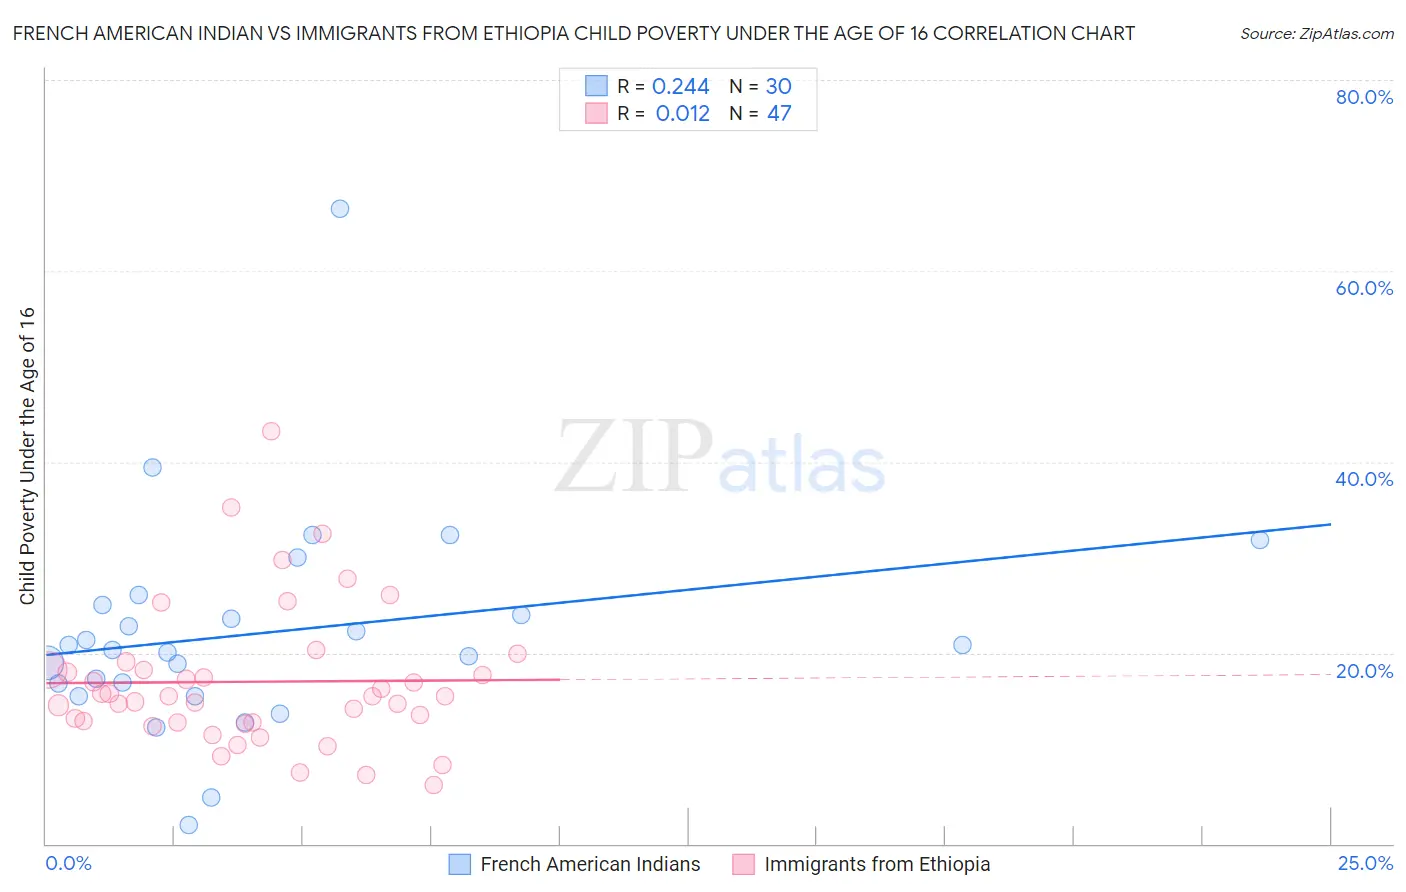 French American Indian vs Immigrants from Ethiopia Child Poverty Under the Age of 16